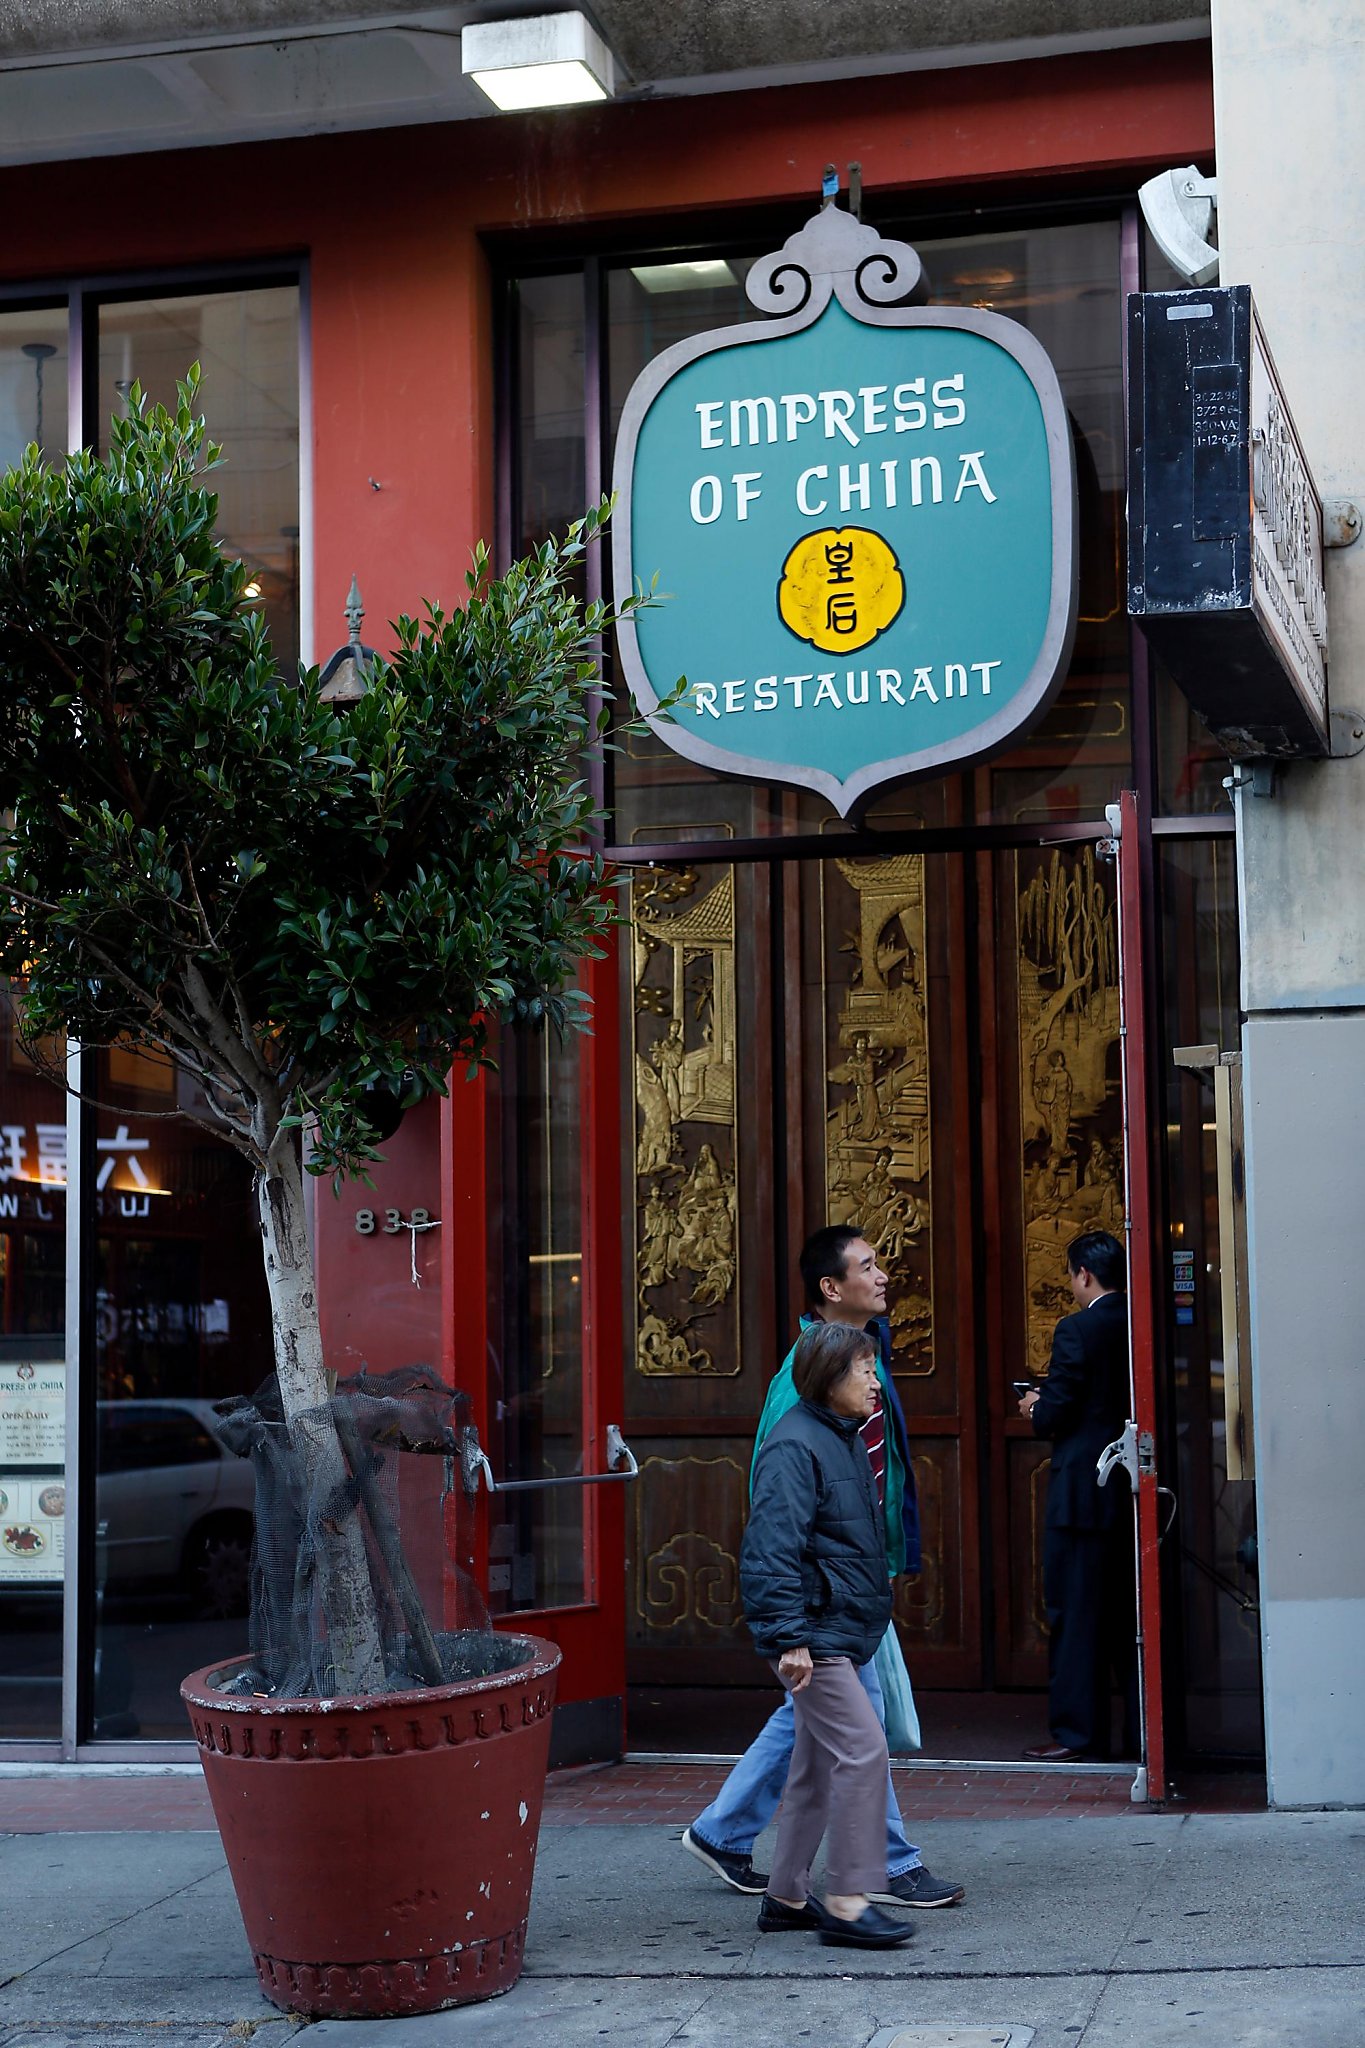 New Owner Could Return A Restaurant To Empress Of China Building